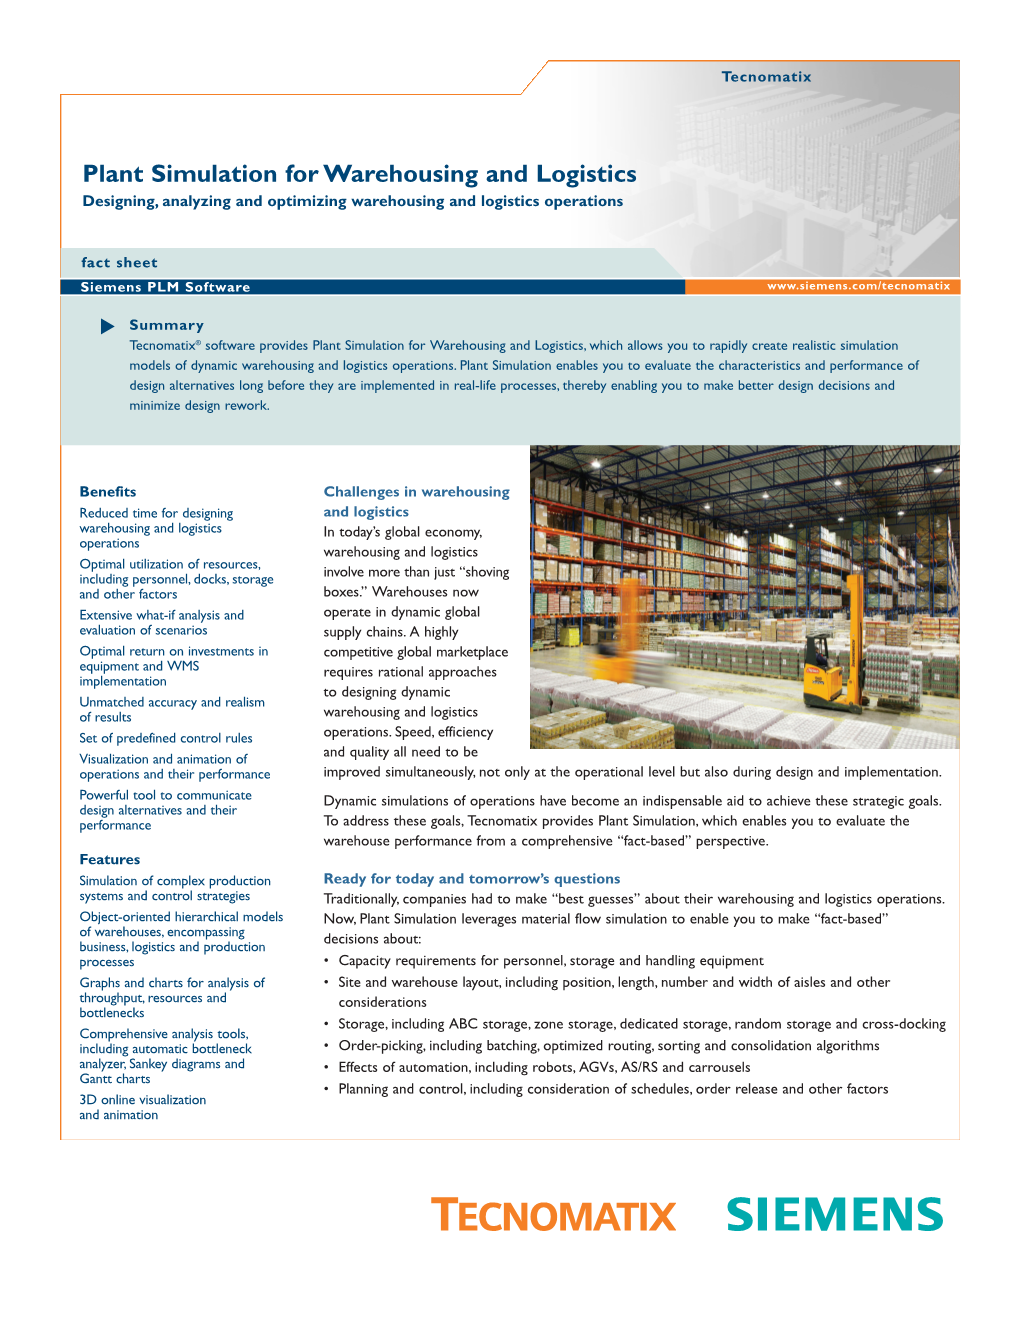 Plant Simulation for Warehousing and Logistics Fact Sheet